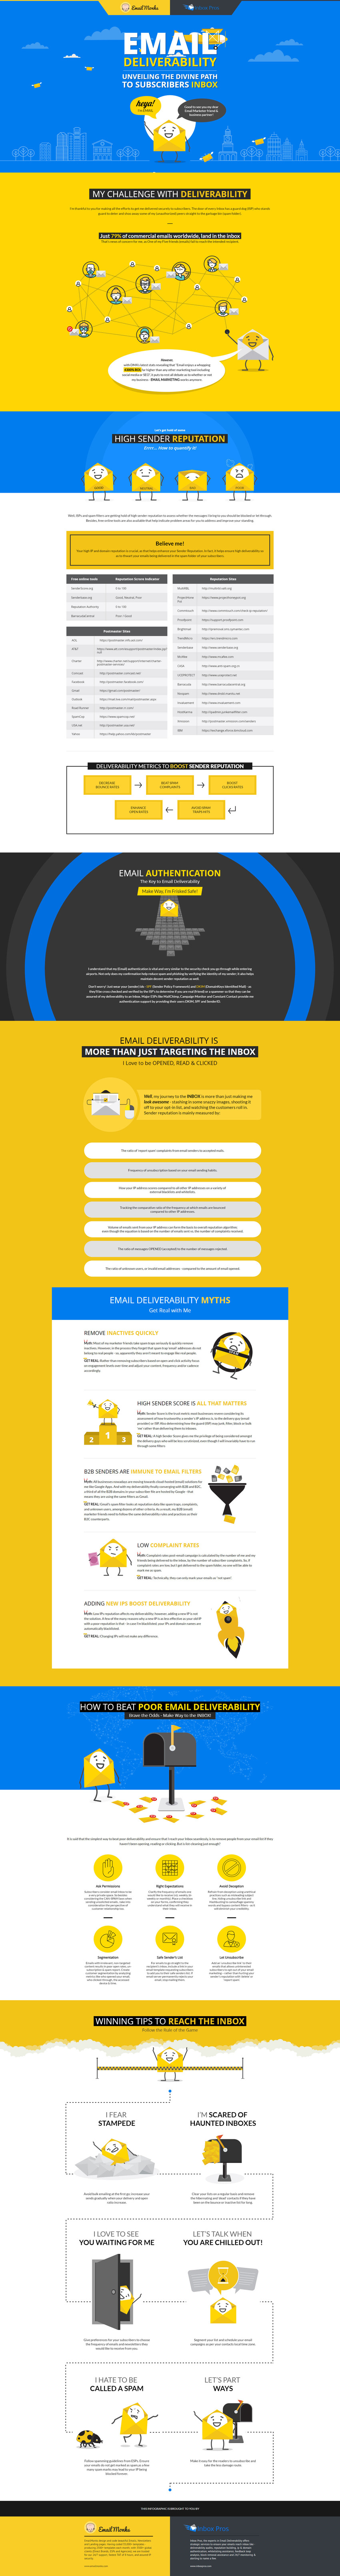 Email Deliverability Best Practices and Tips [INFOGRAPHIC] - EmailMonks | The MarTech Digest | Scoop.it